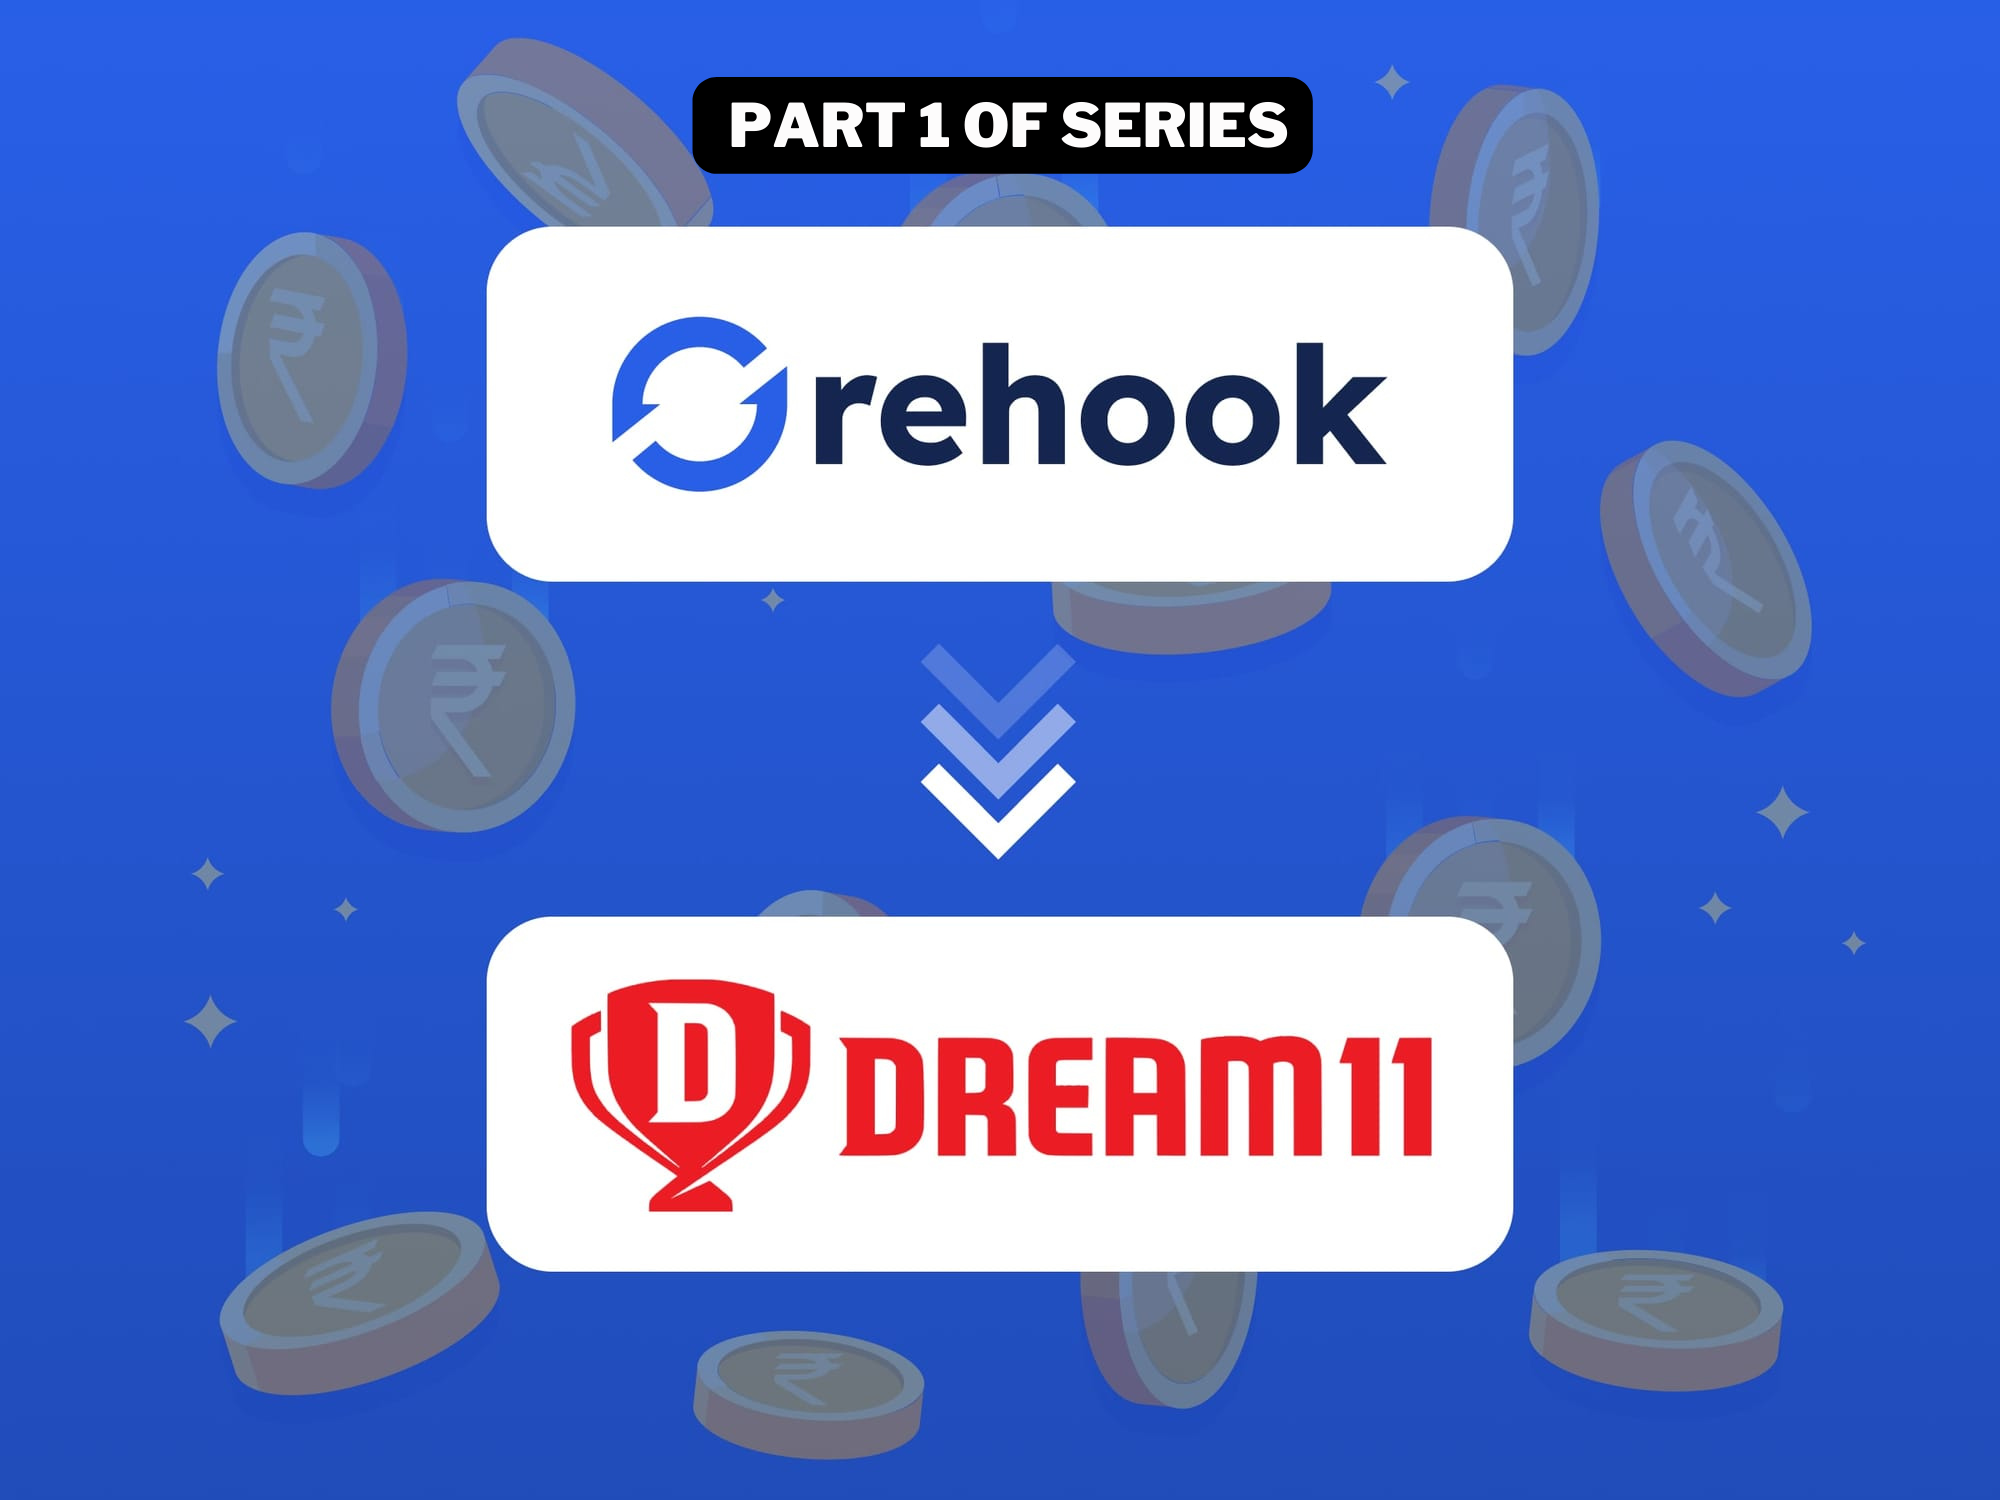 Part One of Series: How to Create a Loyalty Points System Like Dream11's 'DreamCoins' Using rehook.ai